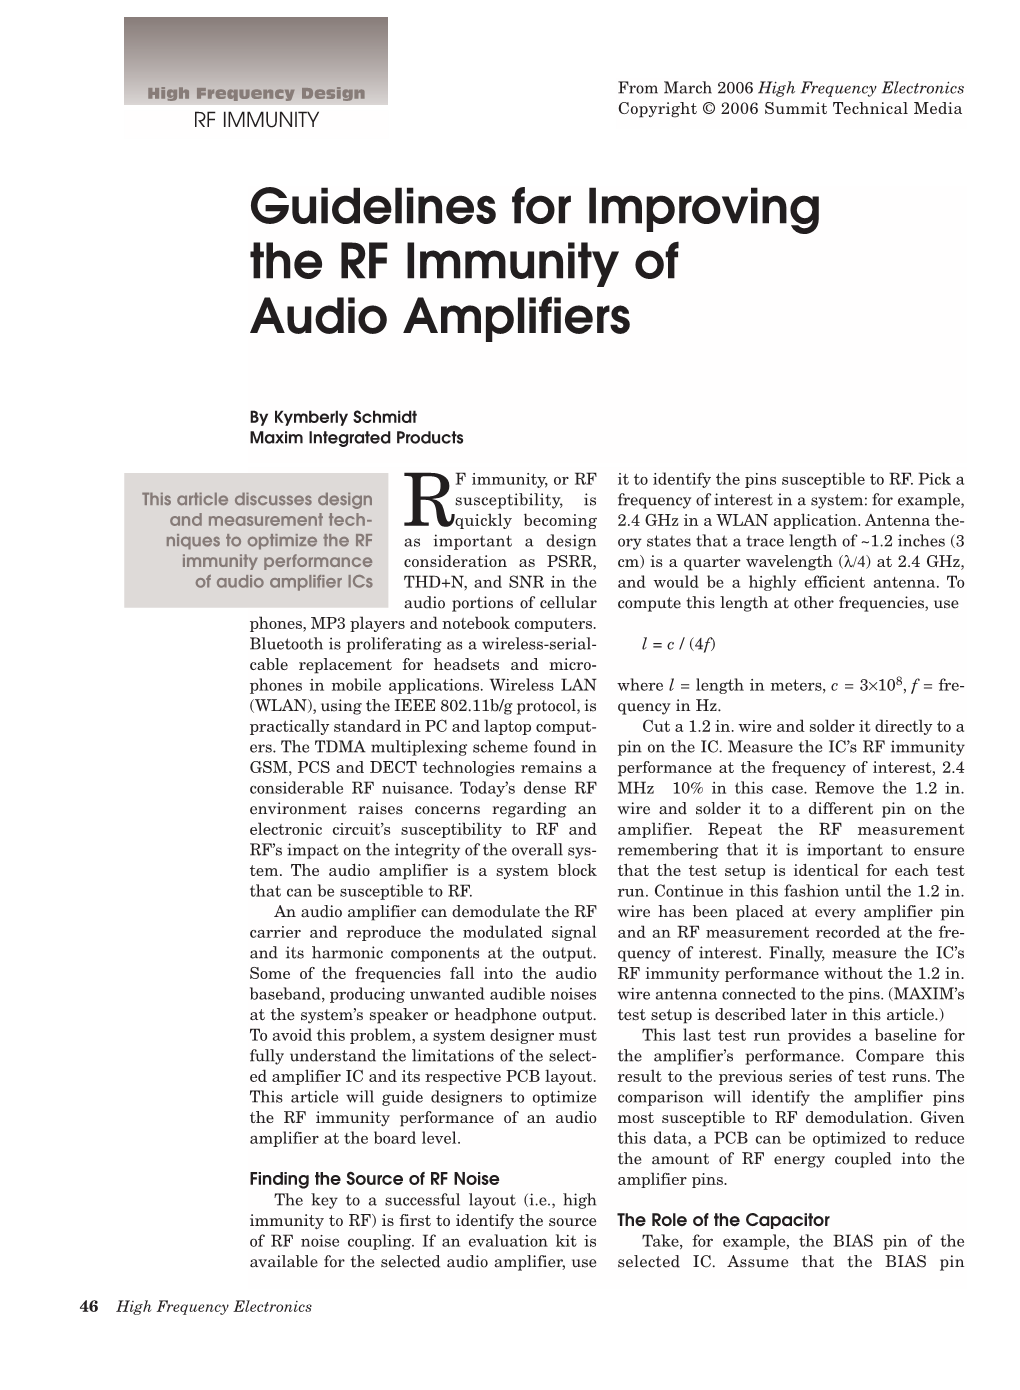 Guidelines for Improving the RF Immunity of Audio Amplifiers